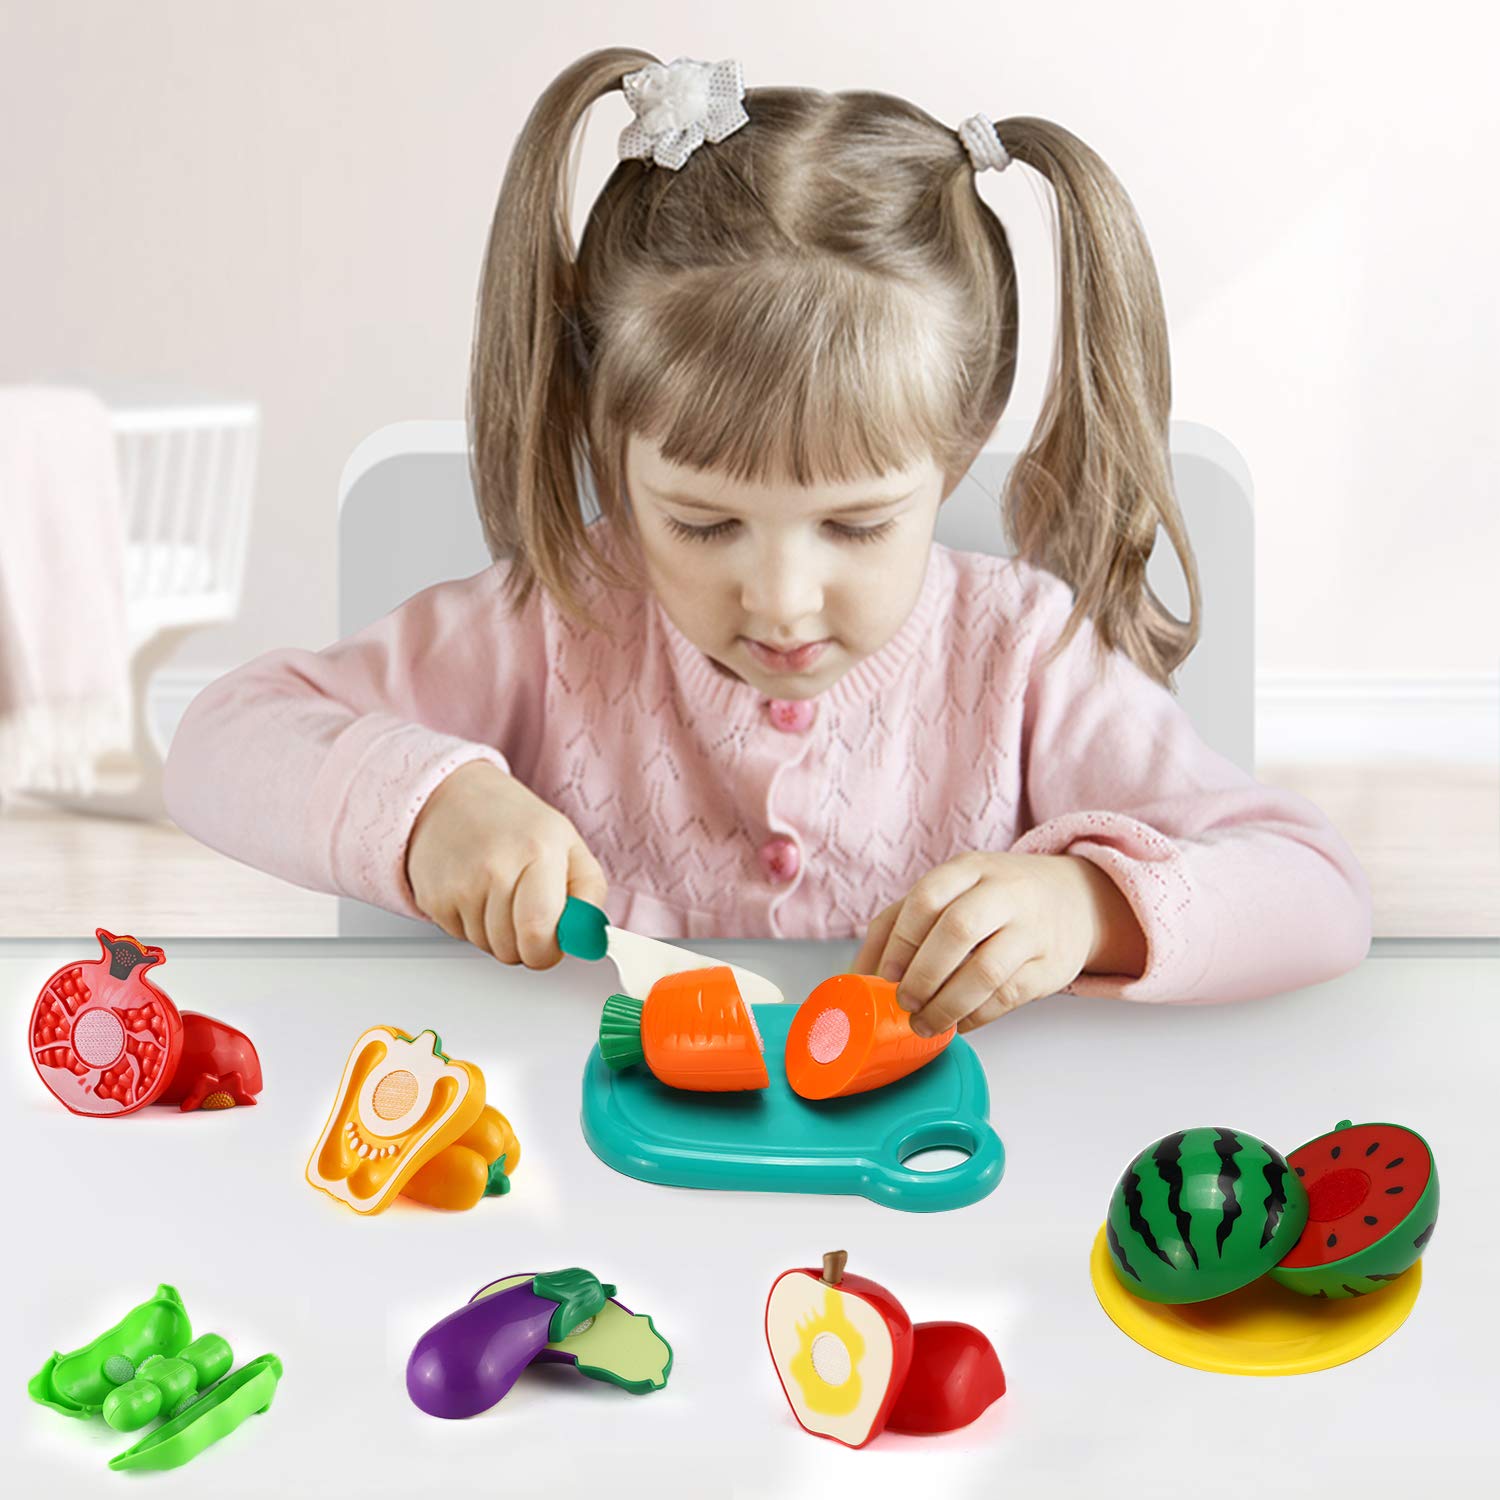 70 PCS Cutting Play Food Toy for Kids Kitchen, Pretend Fruit &Vegetables Accessories with Shopping Storage Basket, Plastic Mini Dishes and Knife, Educational Toy for Toddler Children Birthday Gift